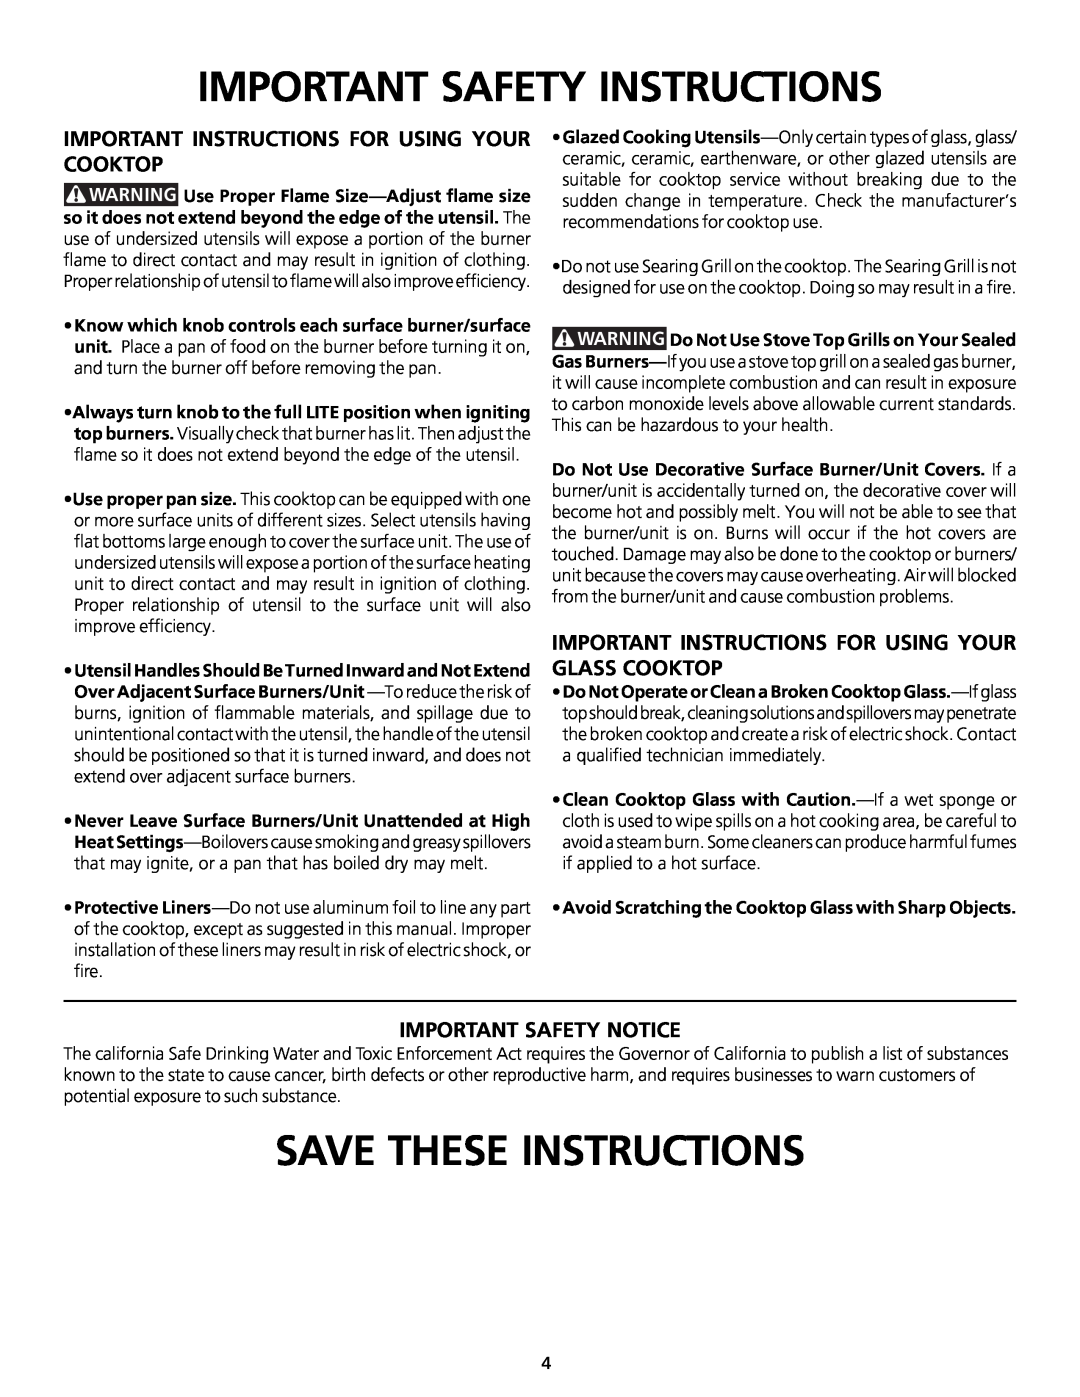 Frigidaire 318200563 Save These Instructions, Important Instructions For Using Your Cooktop, Important Safety Notice 